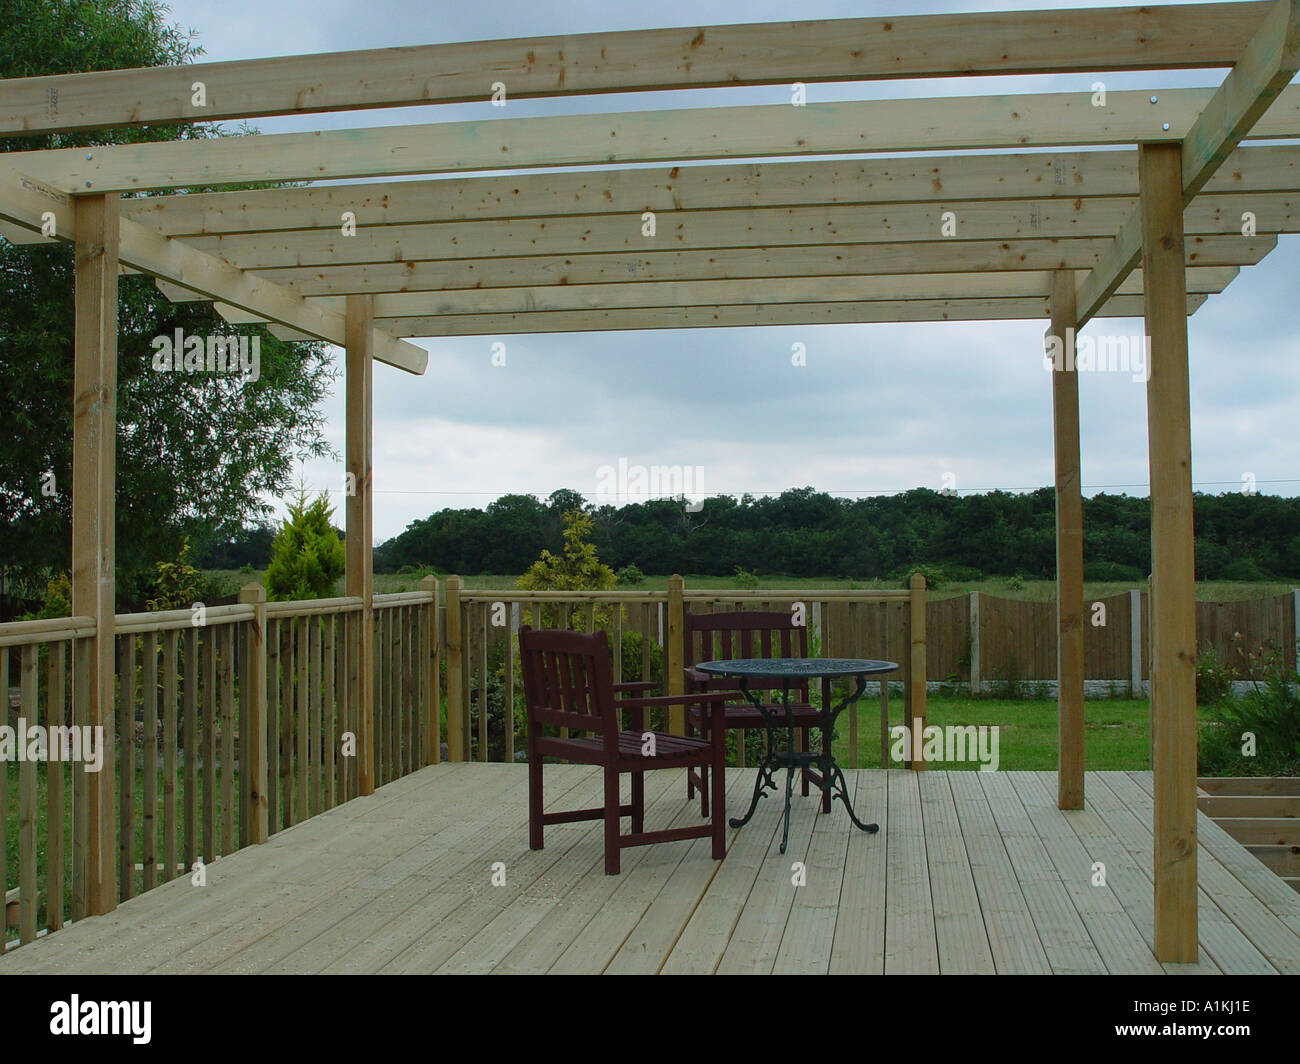 Pergola over garden patio deck the decking and pergola are constructed ...